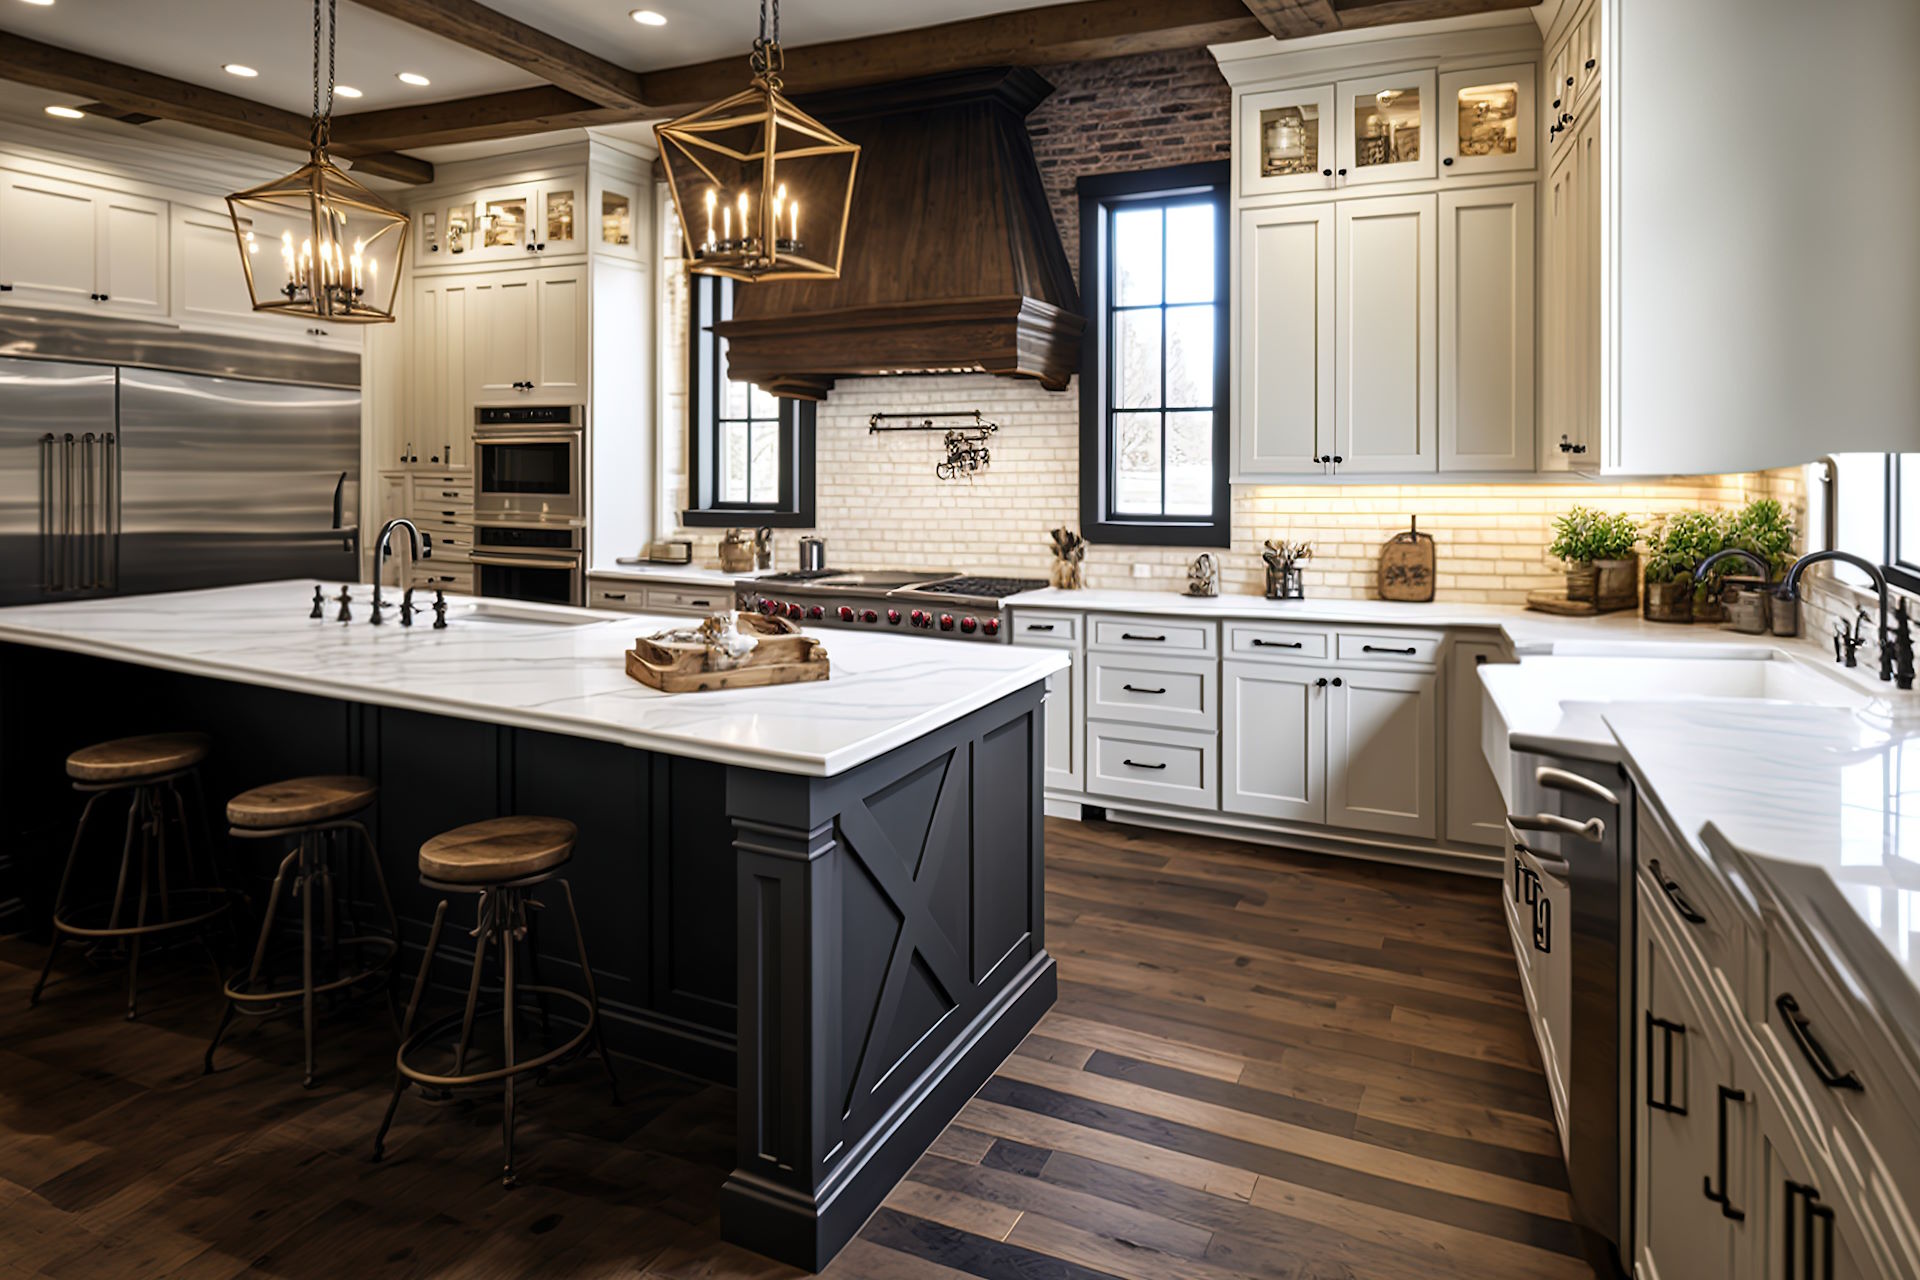 Gourmet or country, Sugar Creek Homes builds the home you want with the kitchen you dream of.